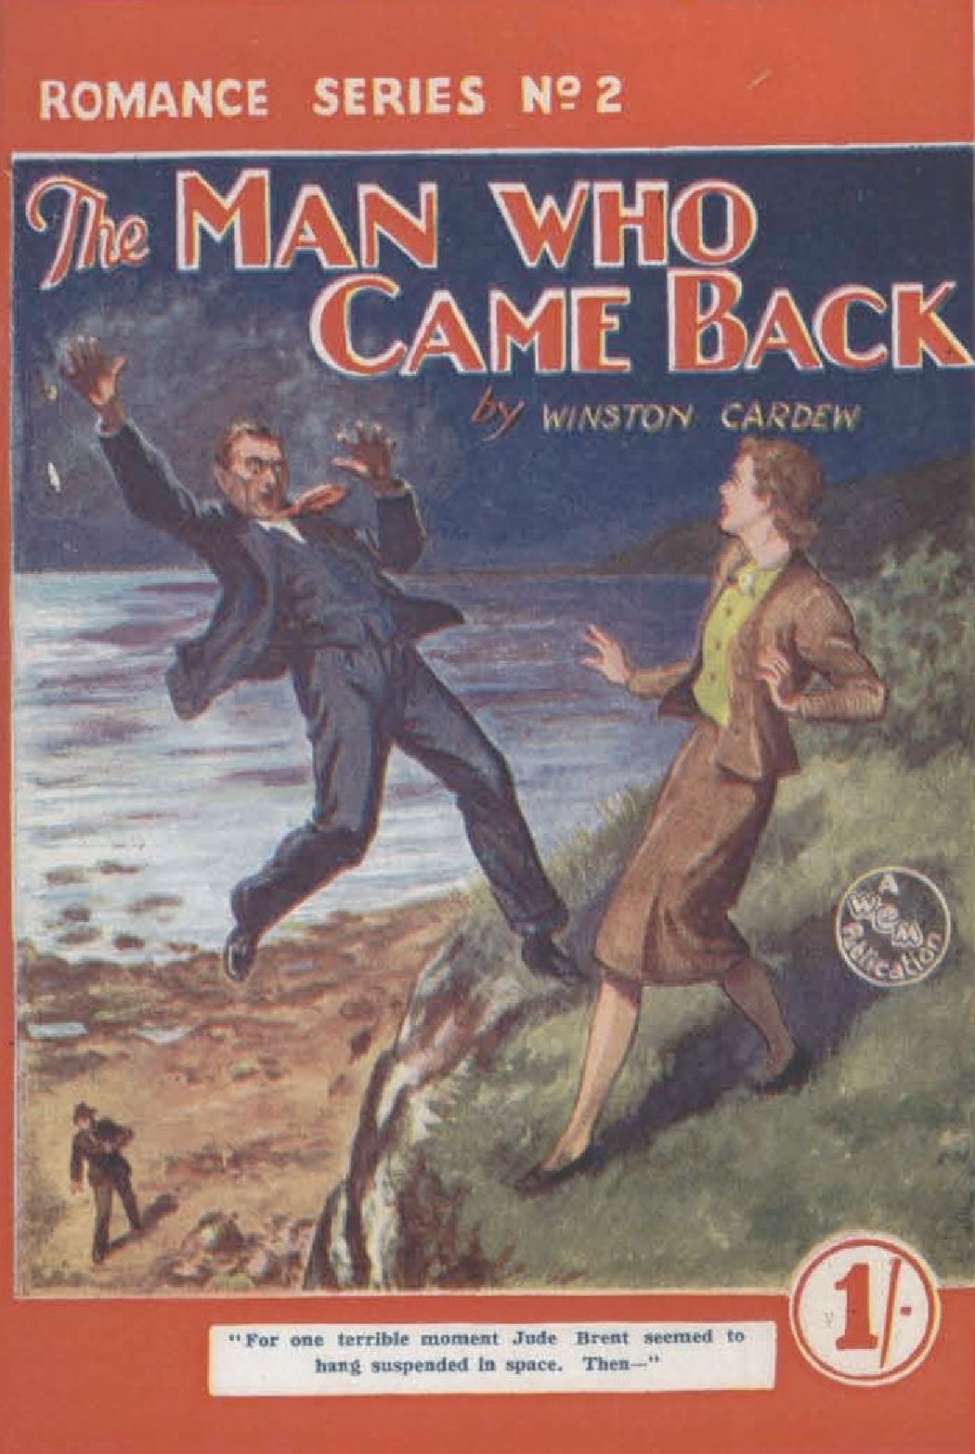 Book Cover For Romance Series 2 The Man Who Came Back